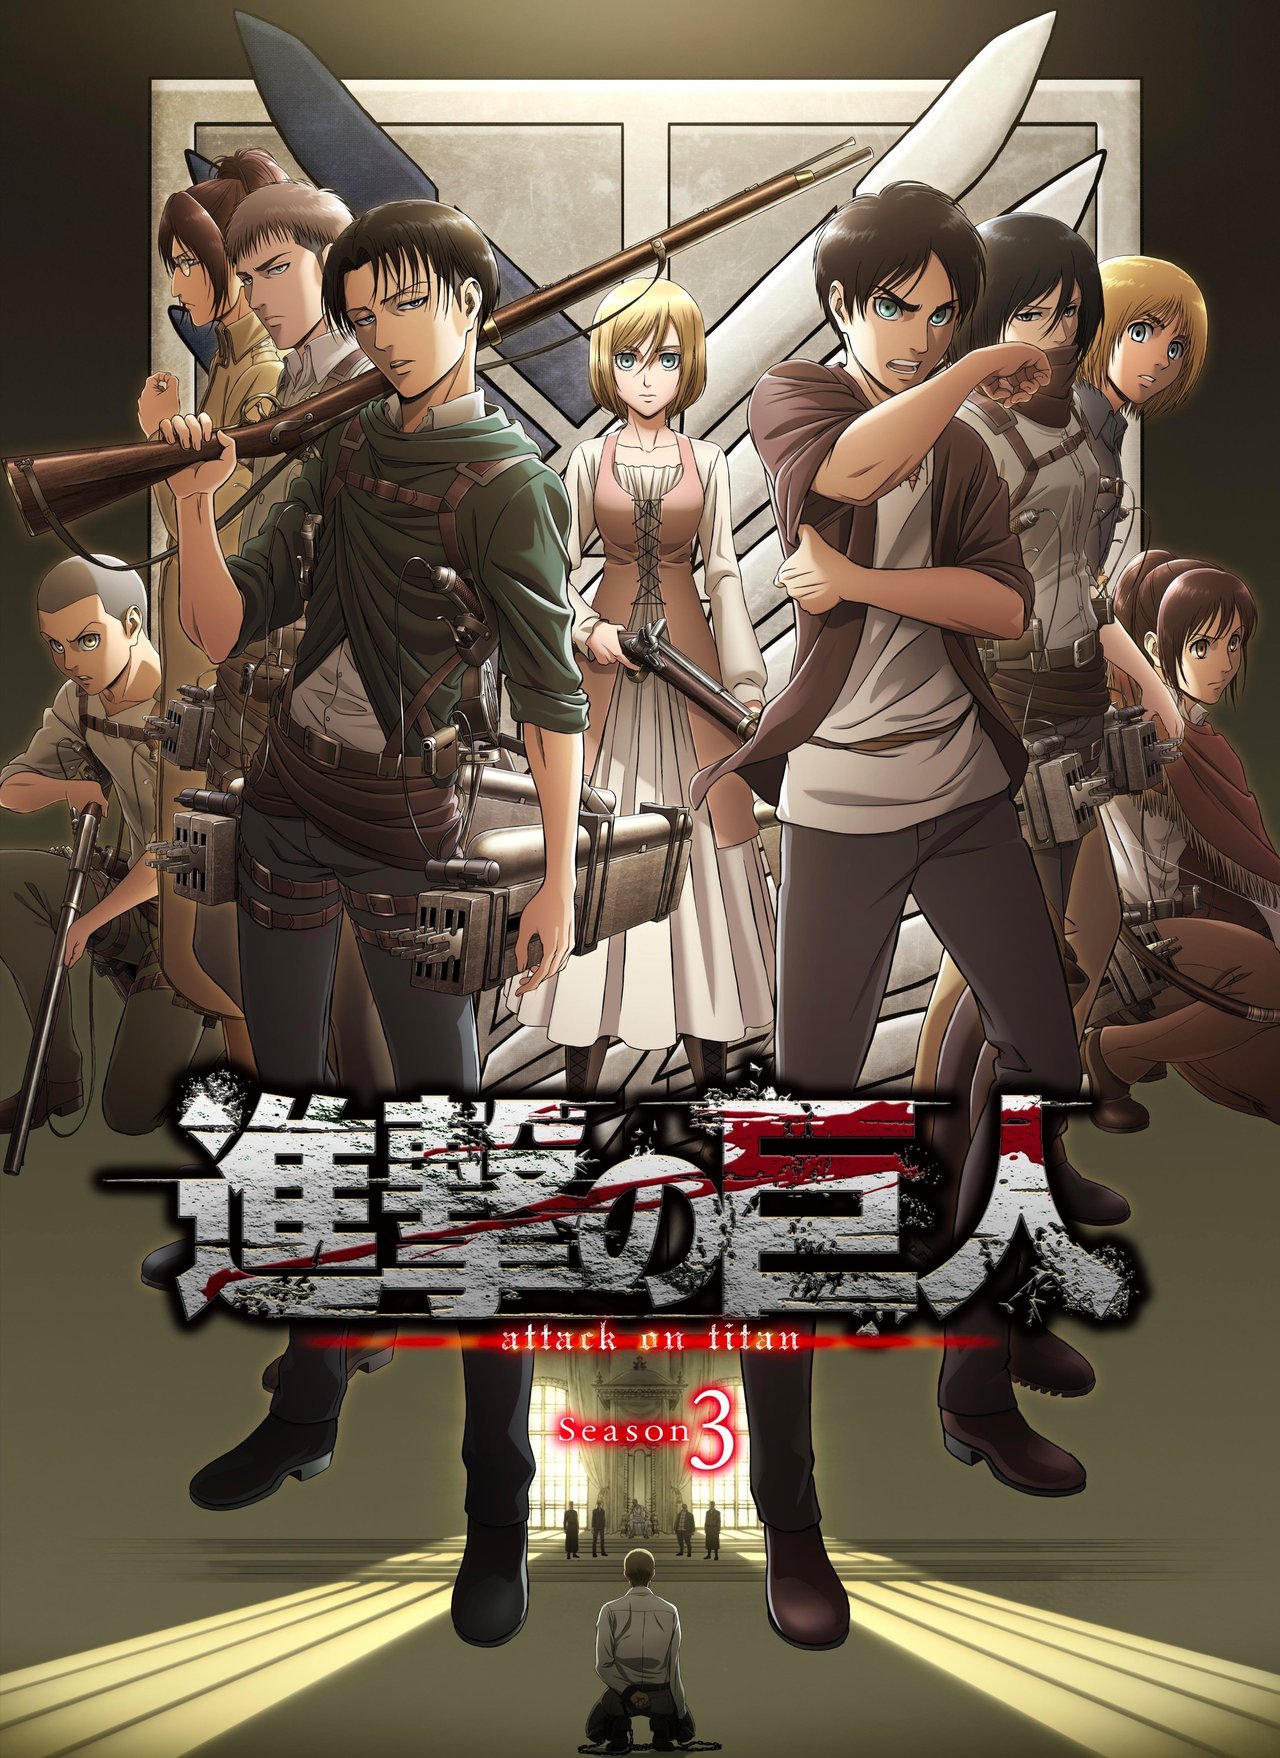 The first episode of the âAttack on Titanâ S3 anime will have a world premiere screening at Anime Expo on July 8th. Its regular TV broadcast begins July 22nd on NHK.